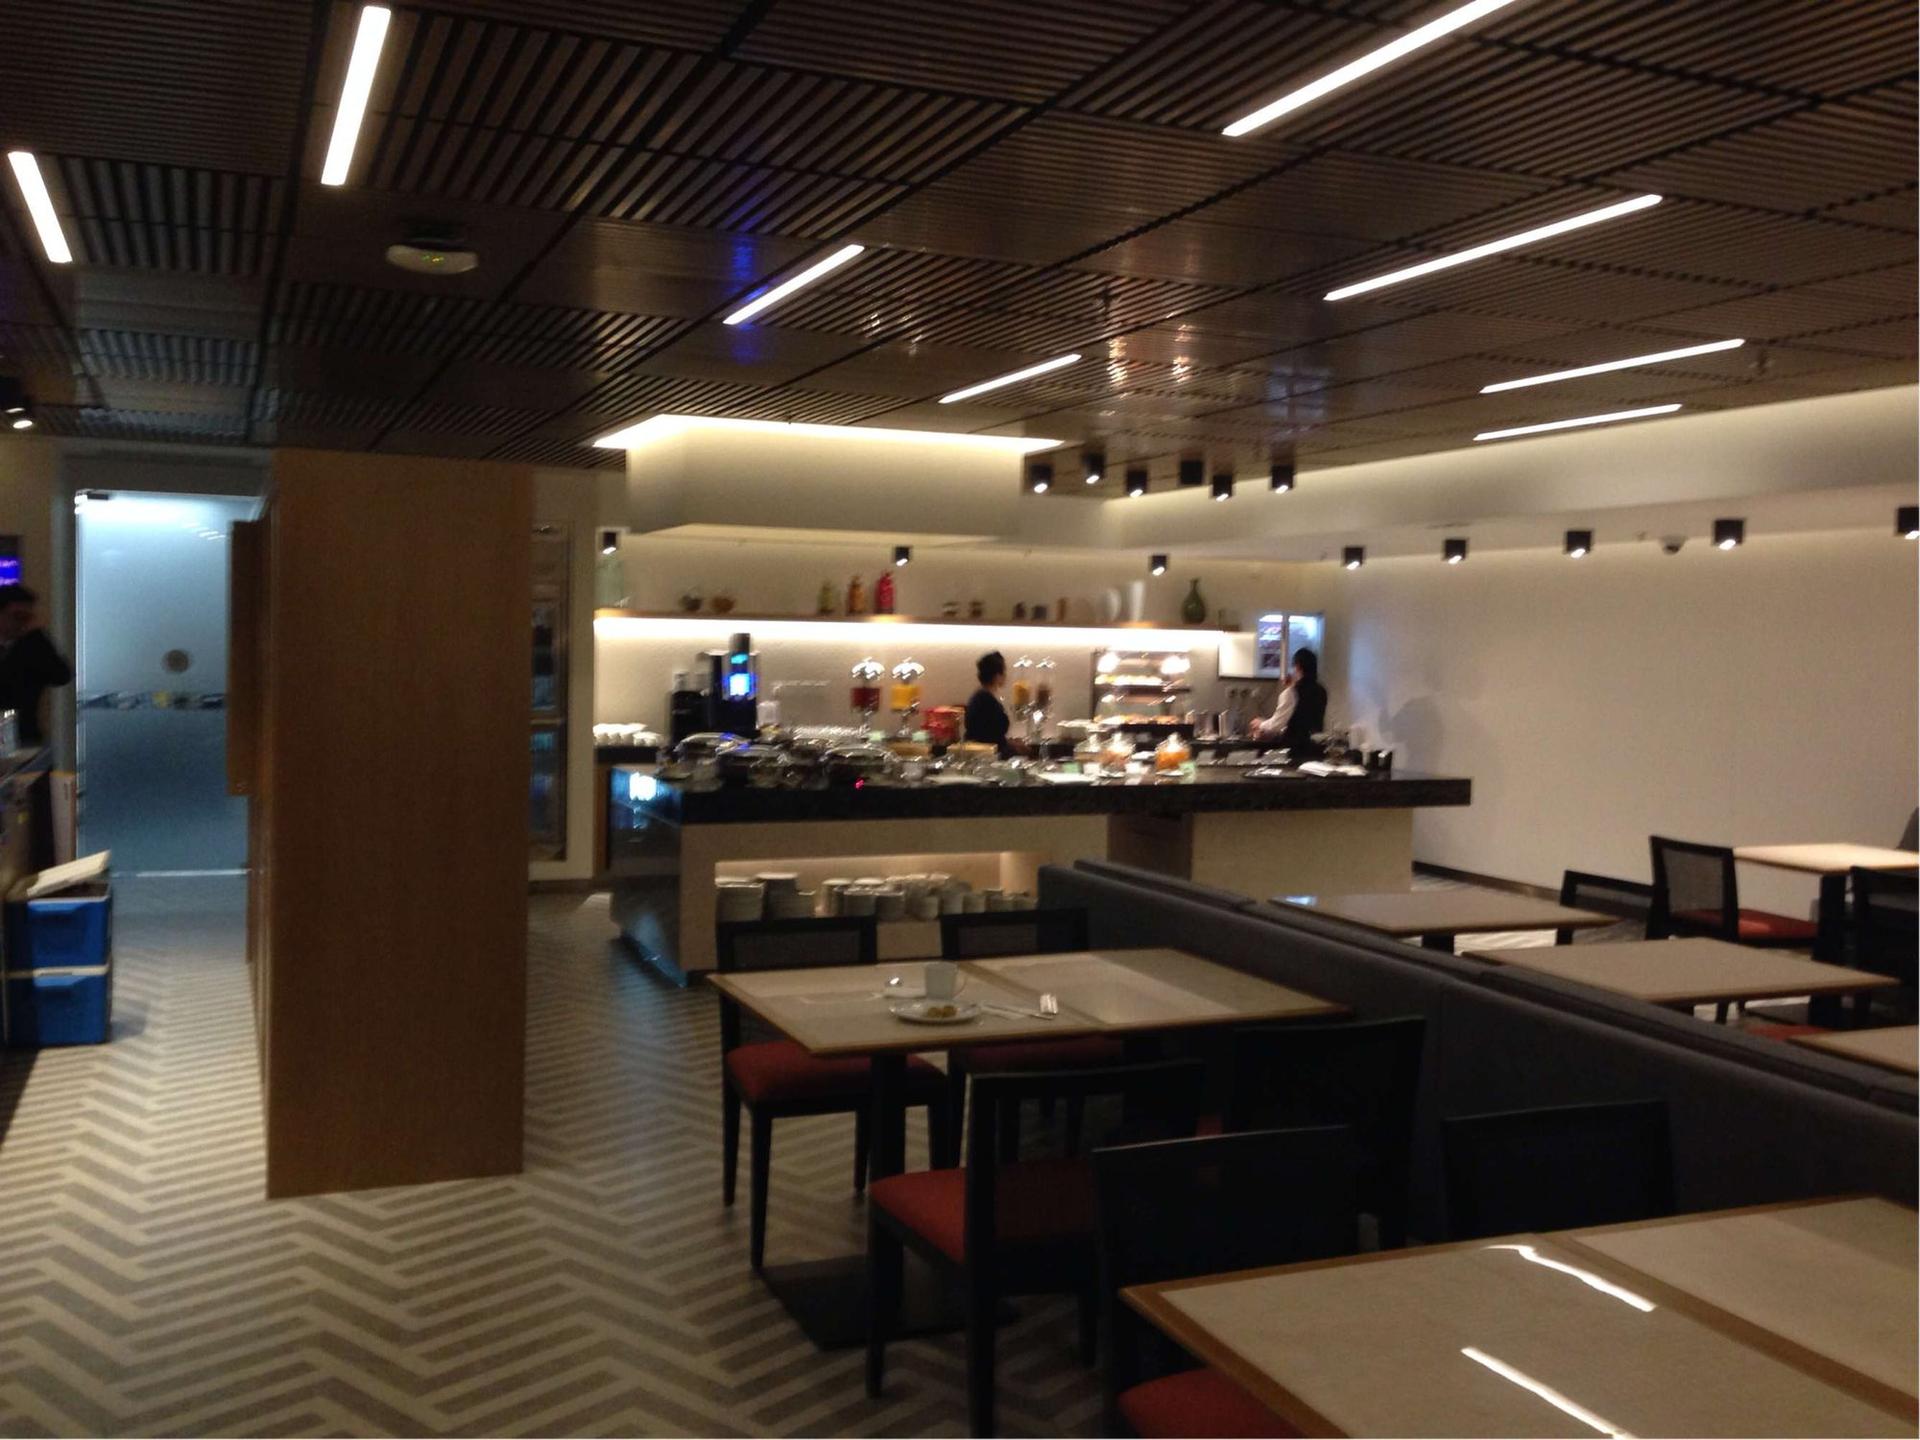 Singapore Airlines SilverKris Business Class Lounge image 60 of 68